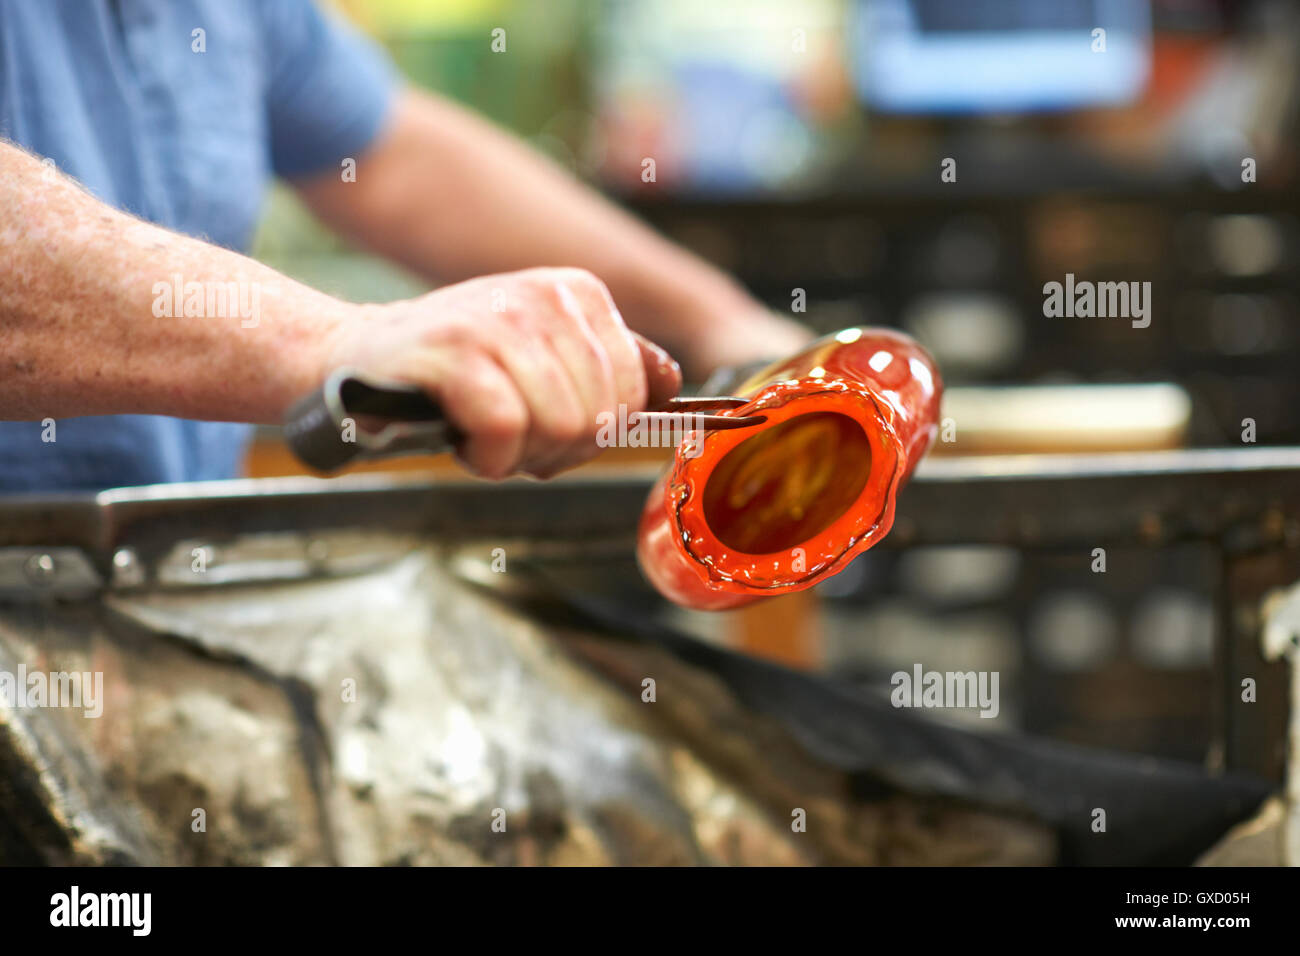 Glassblower in workshop shaping molten glass material with hand tools Stock Photo